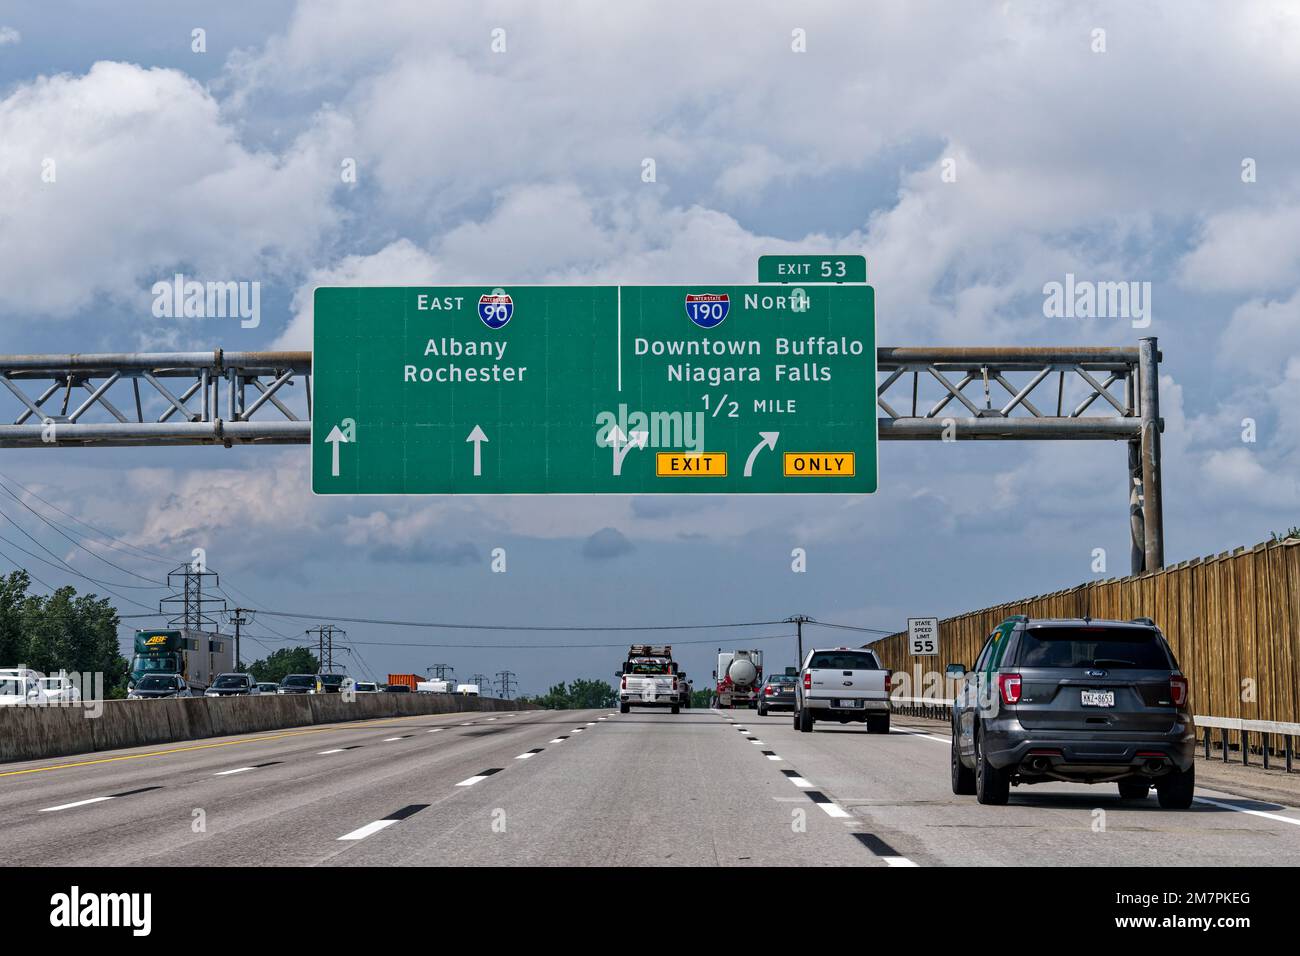 Cheektowaga, New York - July 28, 2022: Exit 53 sign for I190 North, Downtown Buffalo and Niagara Falls from I90 also called the New York State Thruway Stock Photo